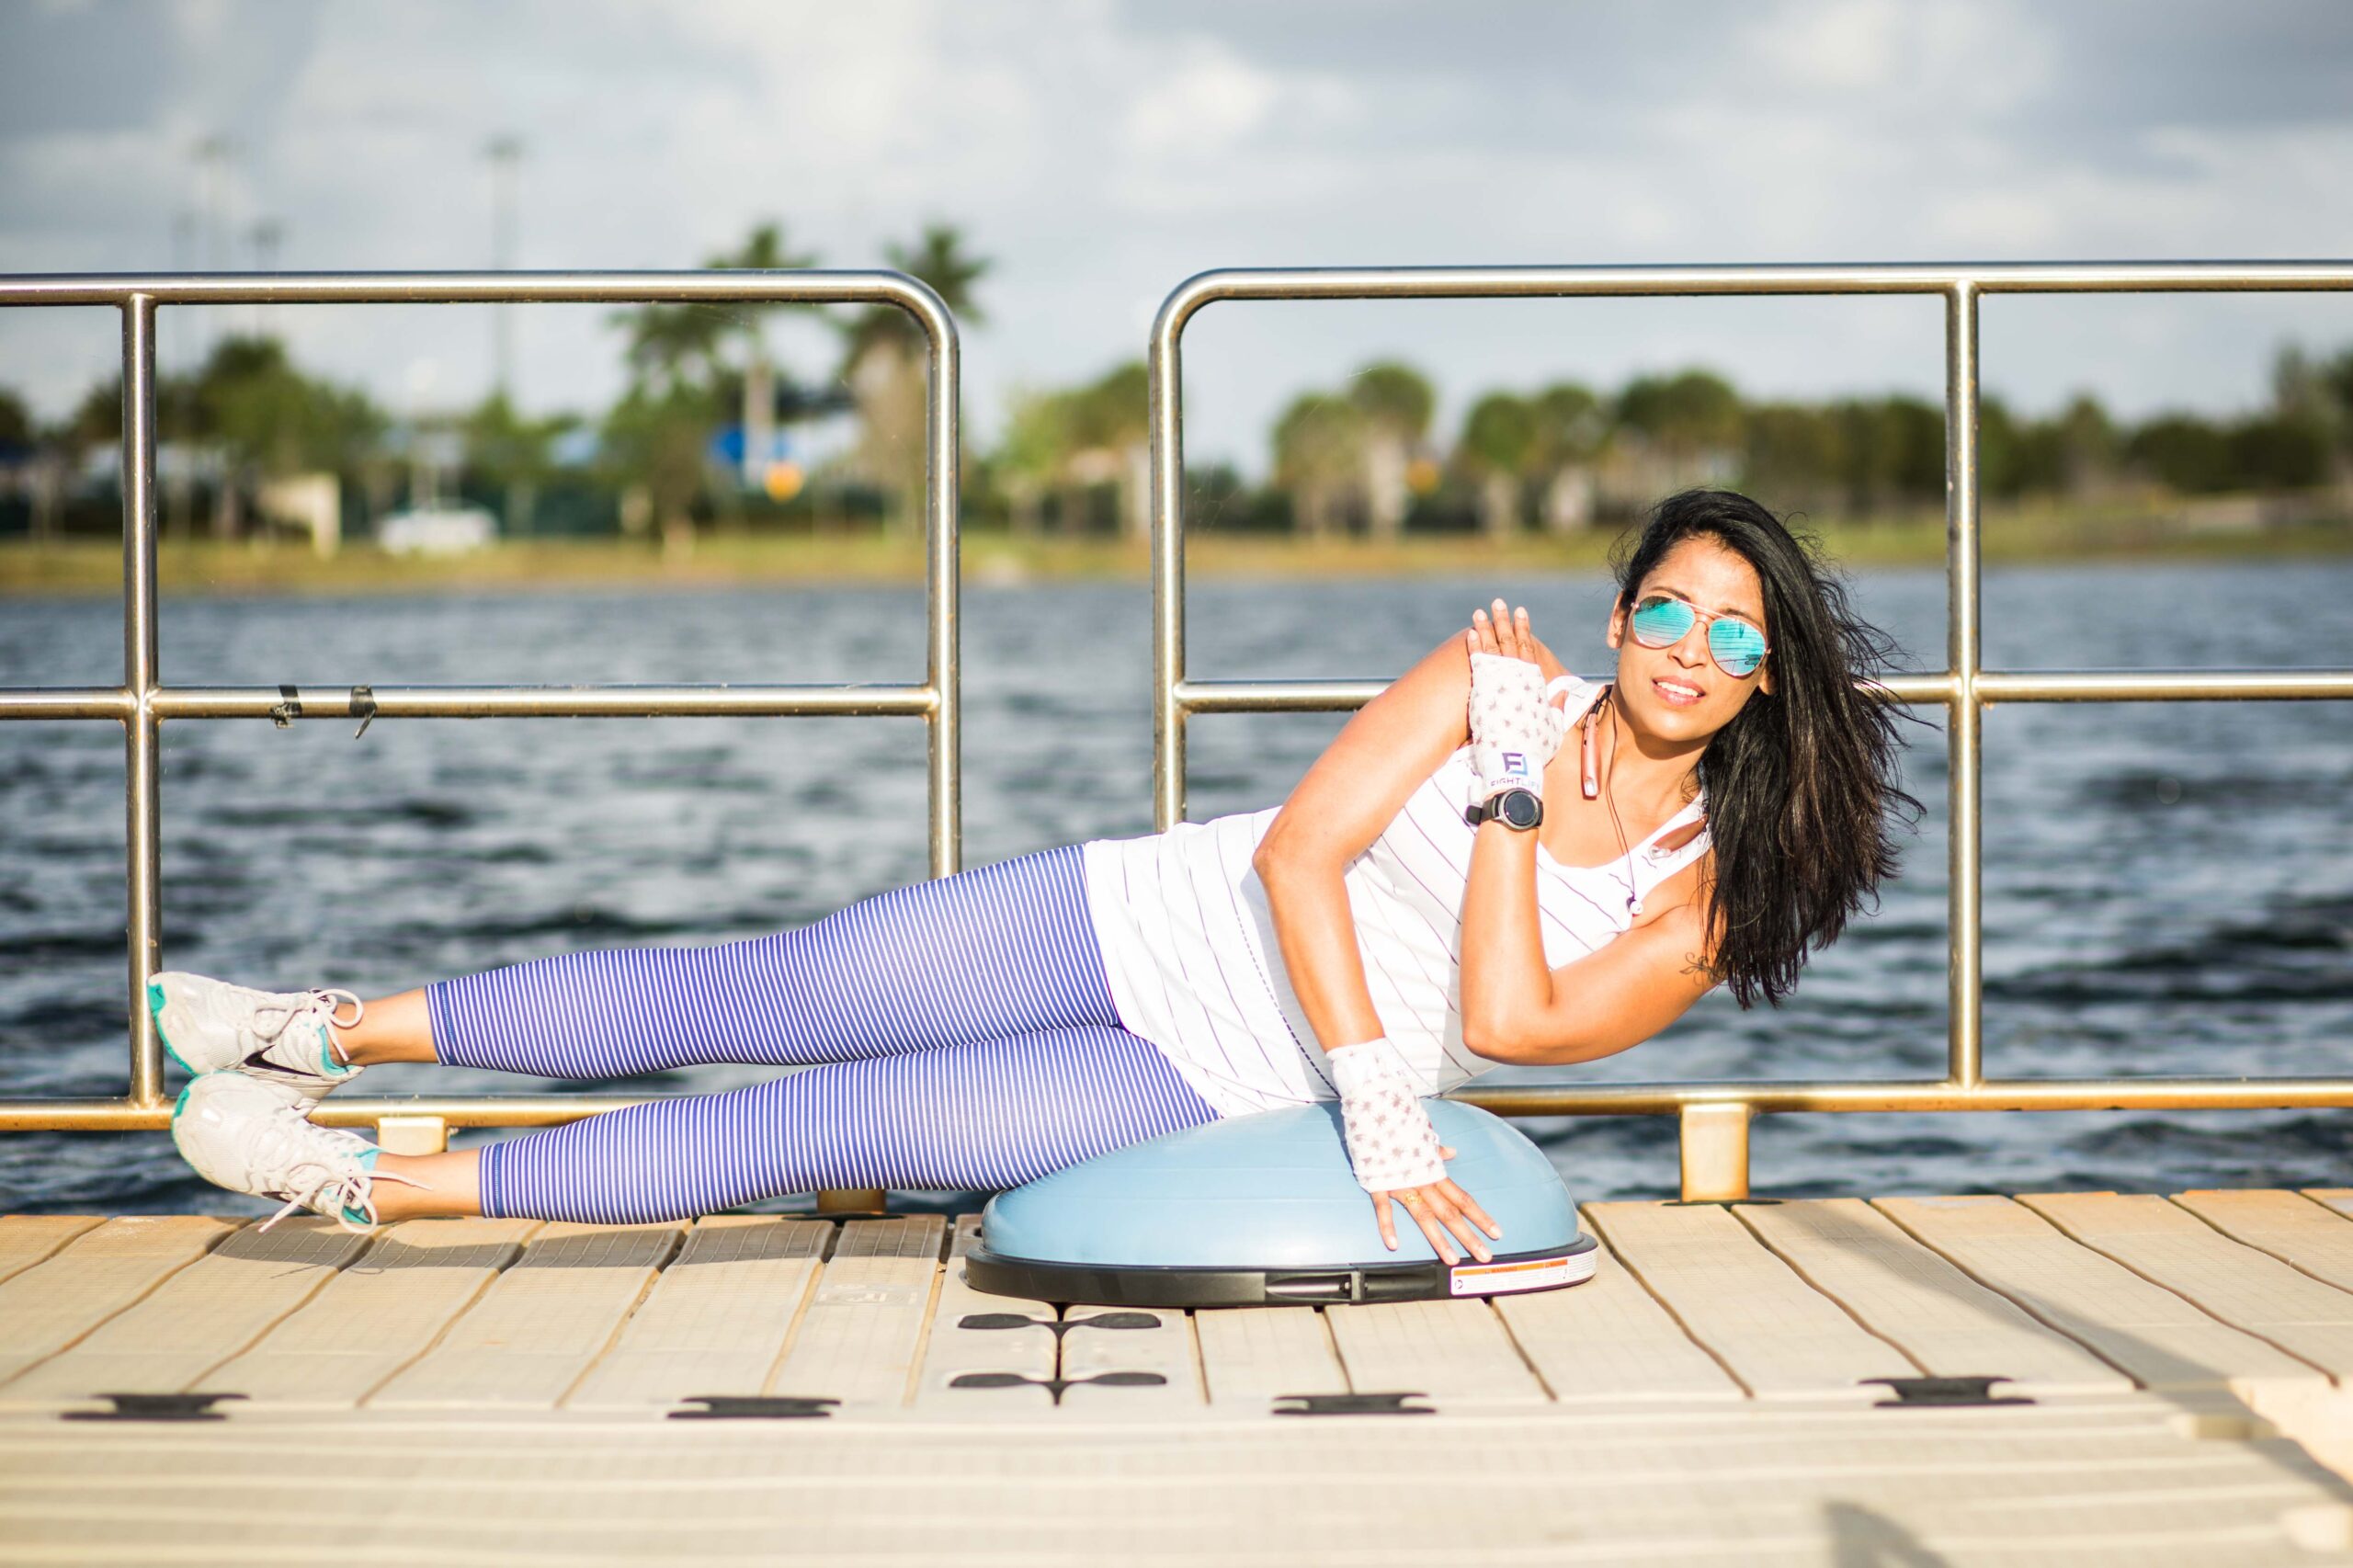 Woman exercises on exercise ball on a dock in front of a lake in the sun